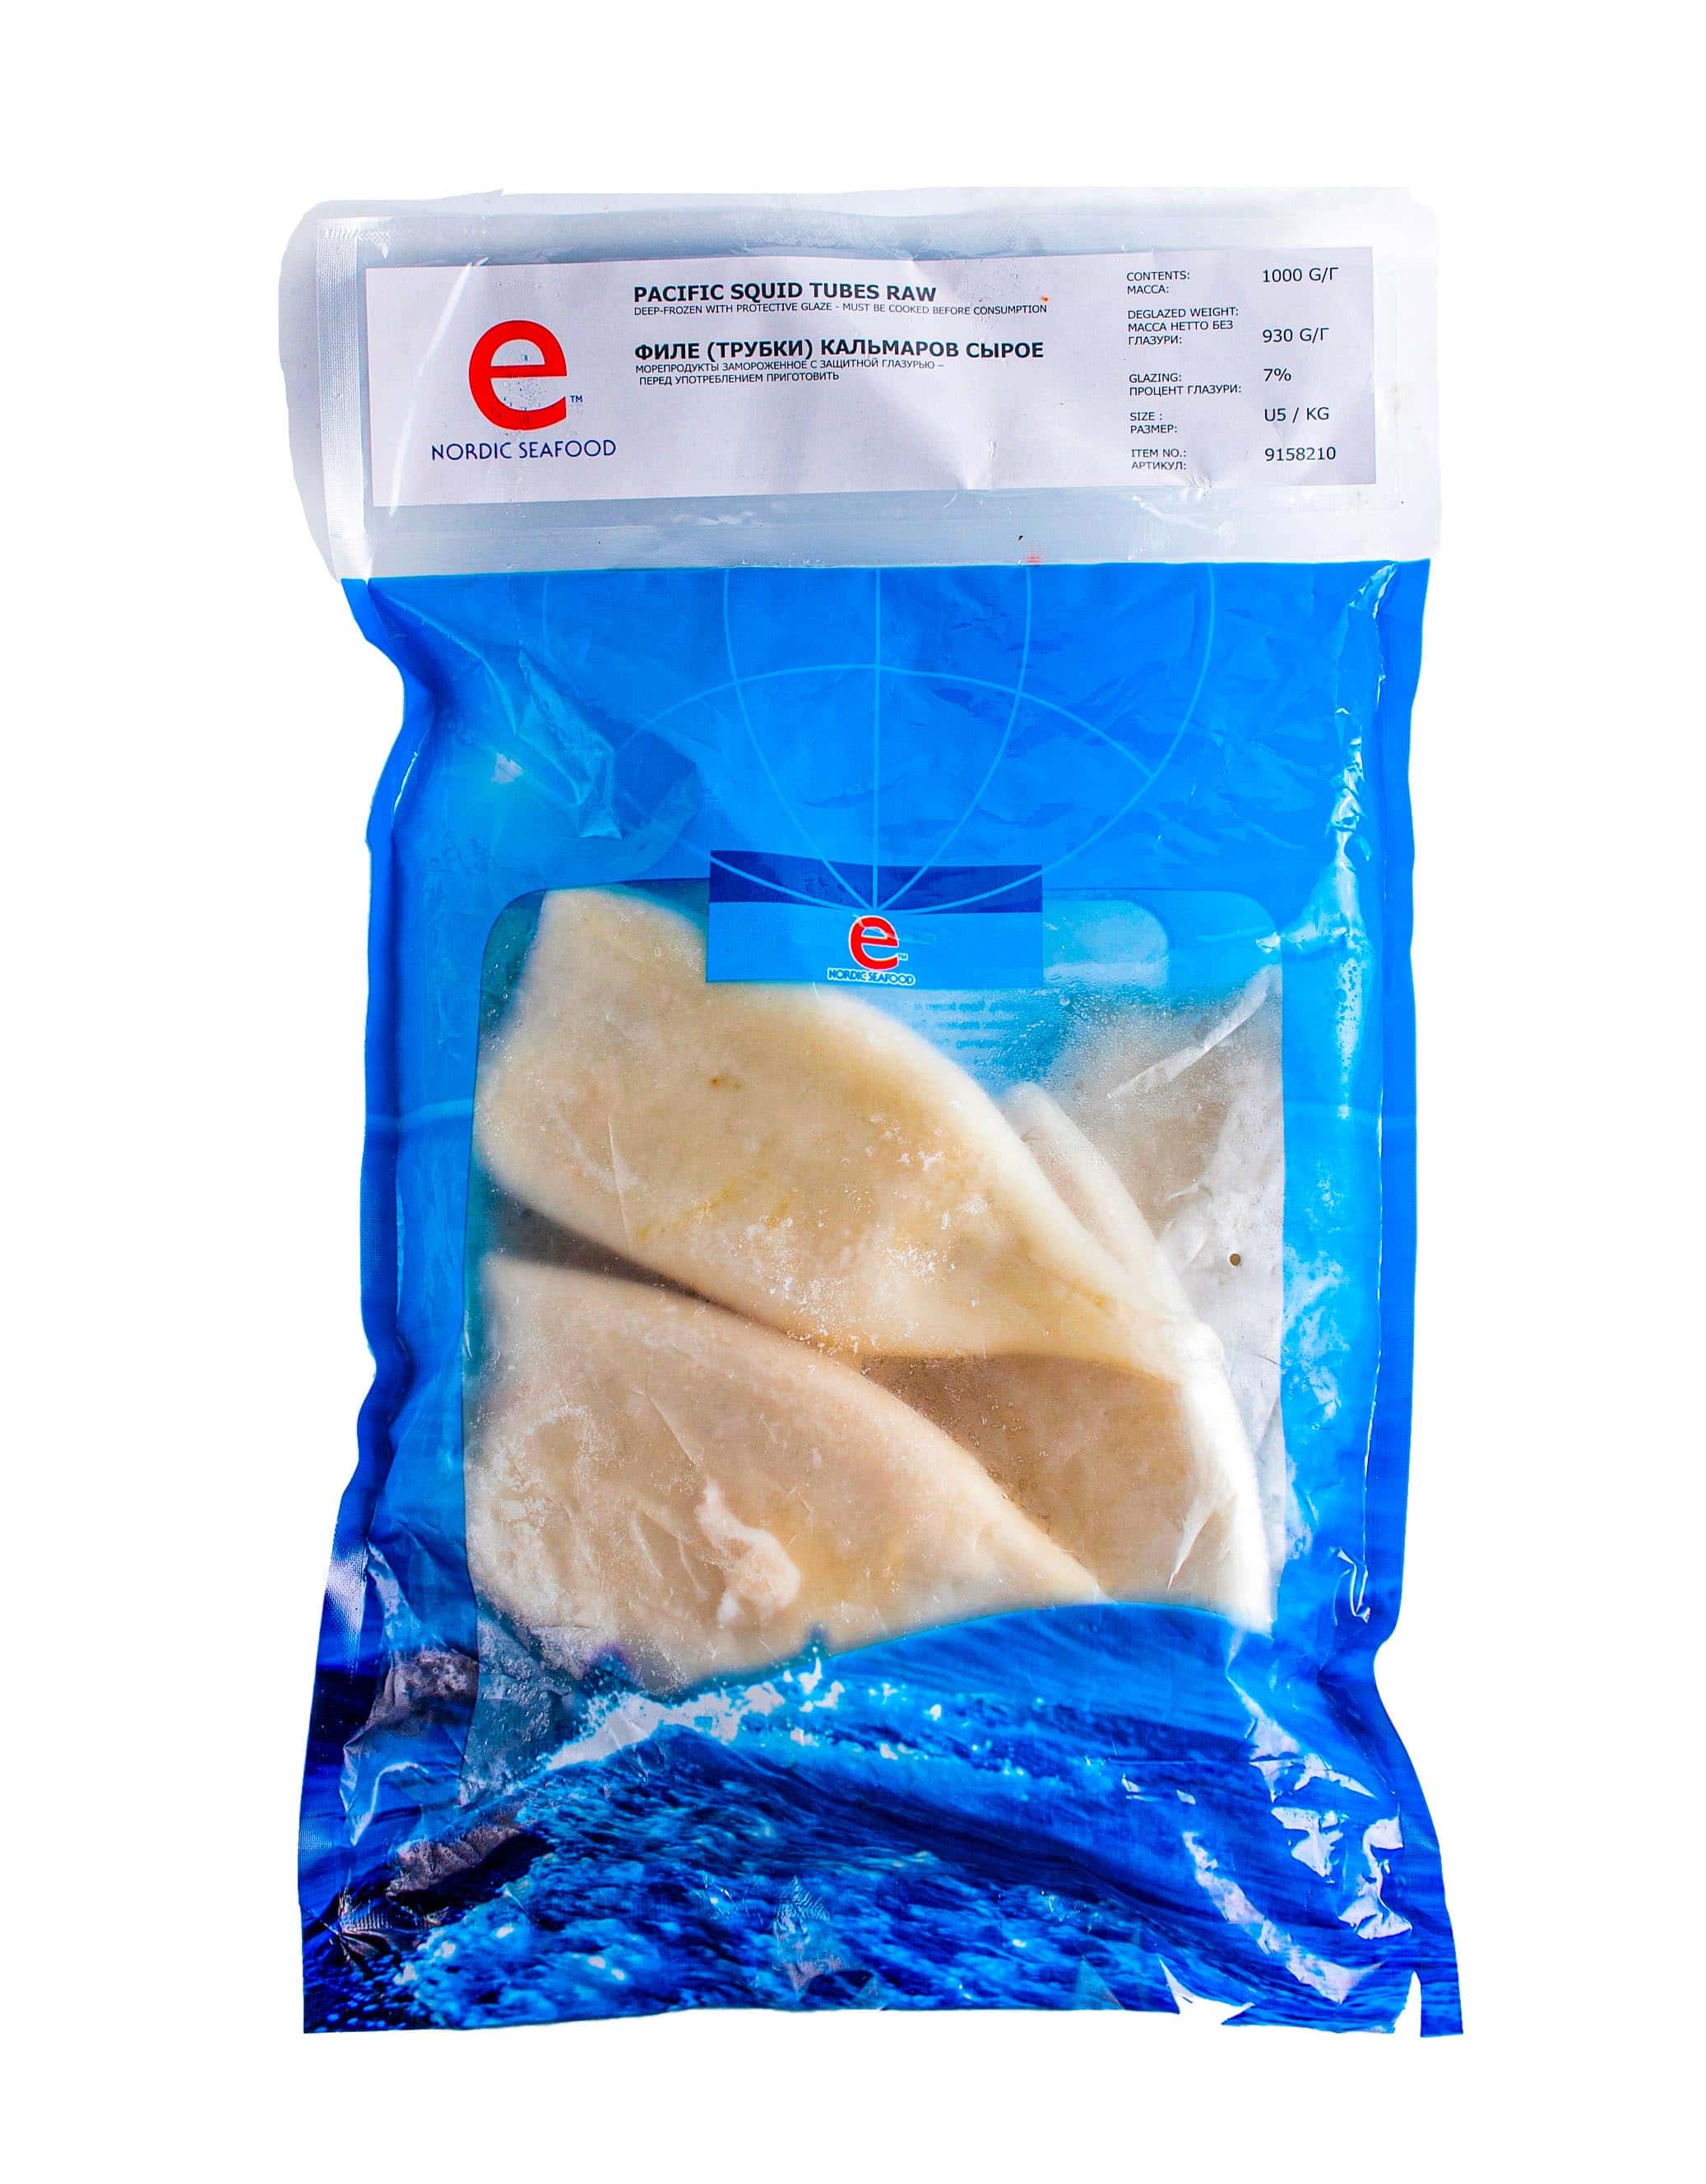 Squid U5 1 kg. Gourmet squid fillet is used in many Asian dishes.